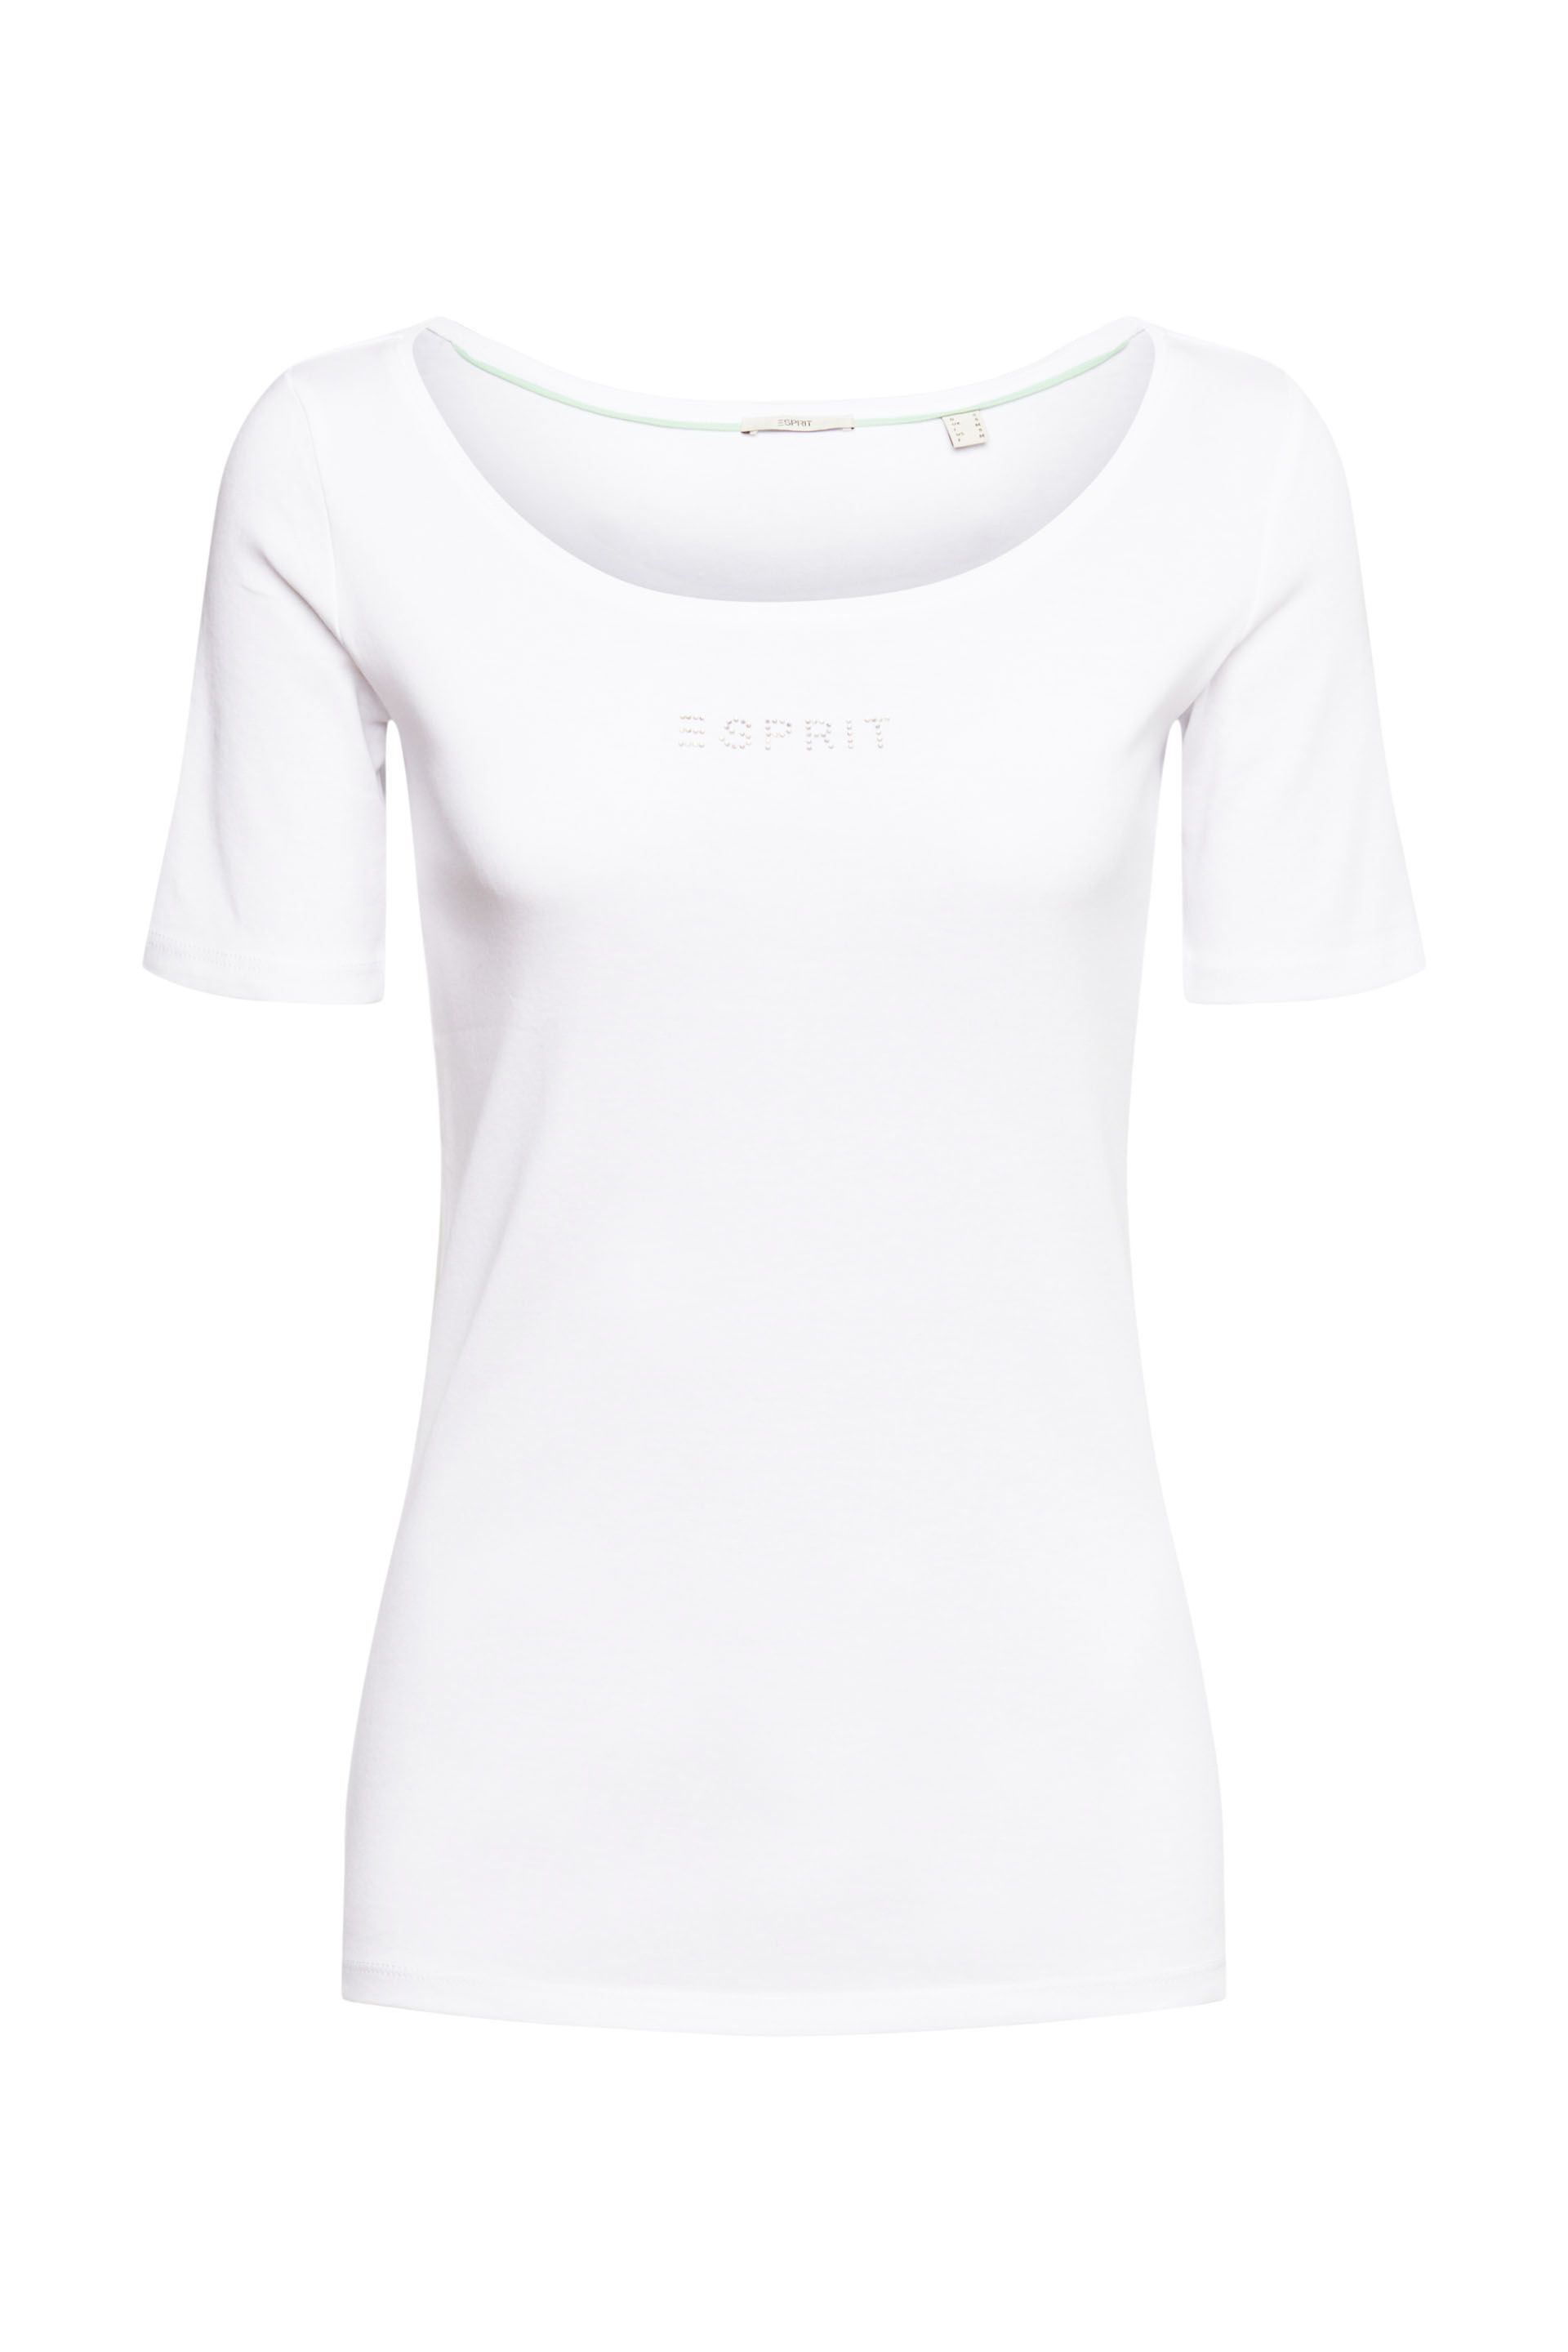 Esprit - T-shirt con logo in cotone, Bianco, large image number 0